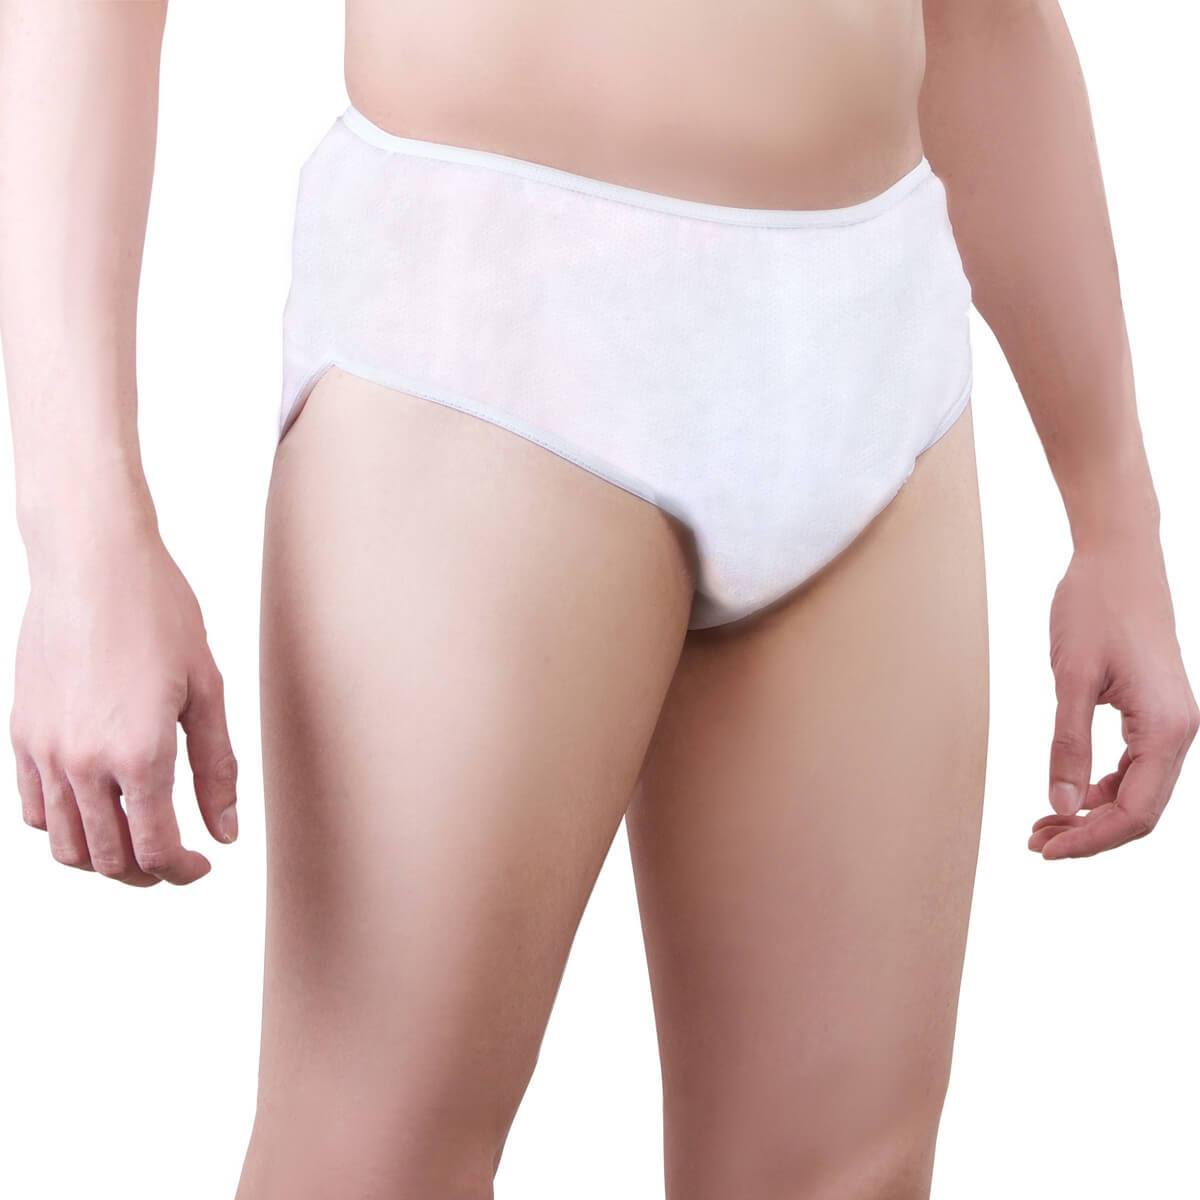 Disposable white travel underwear. Polypro briefs and pants 5pcs